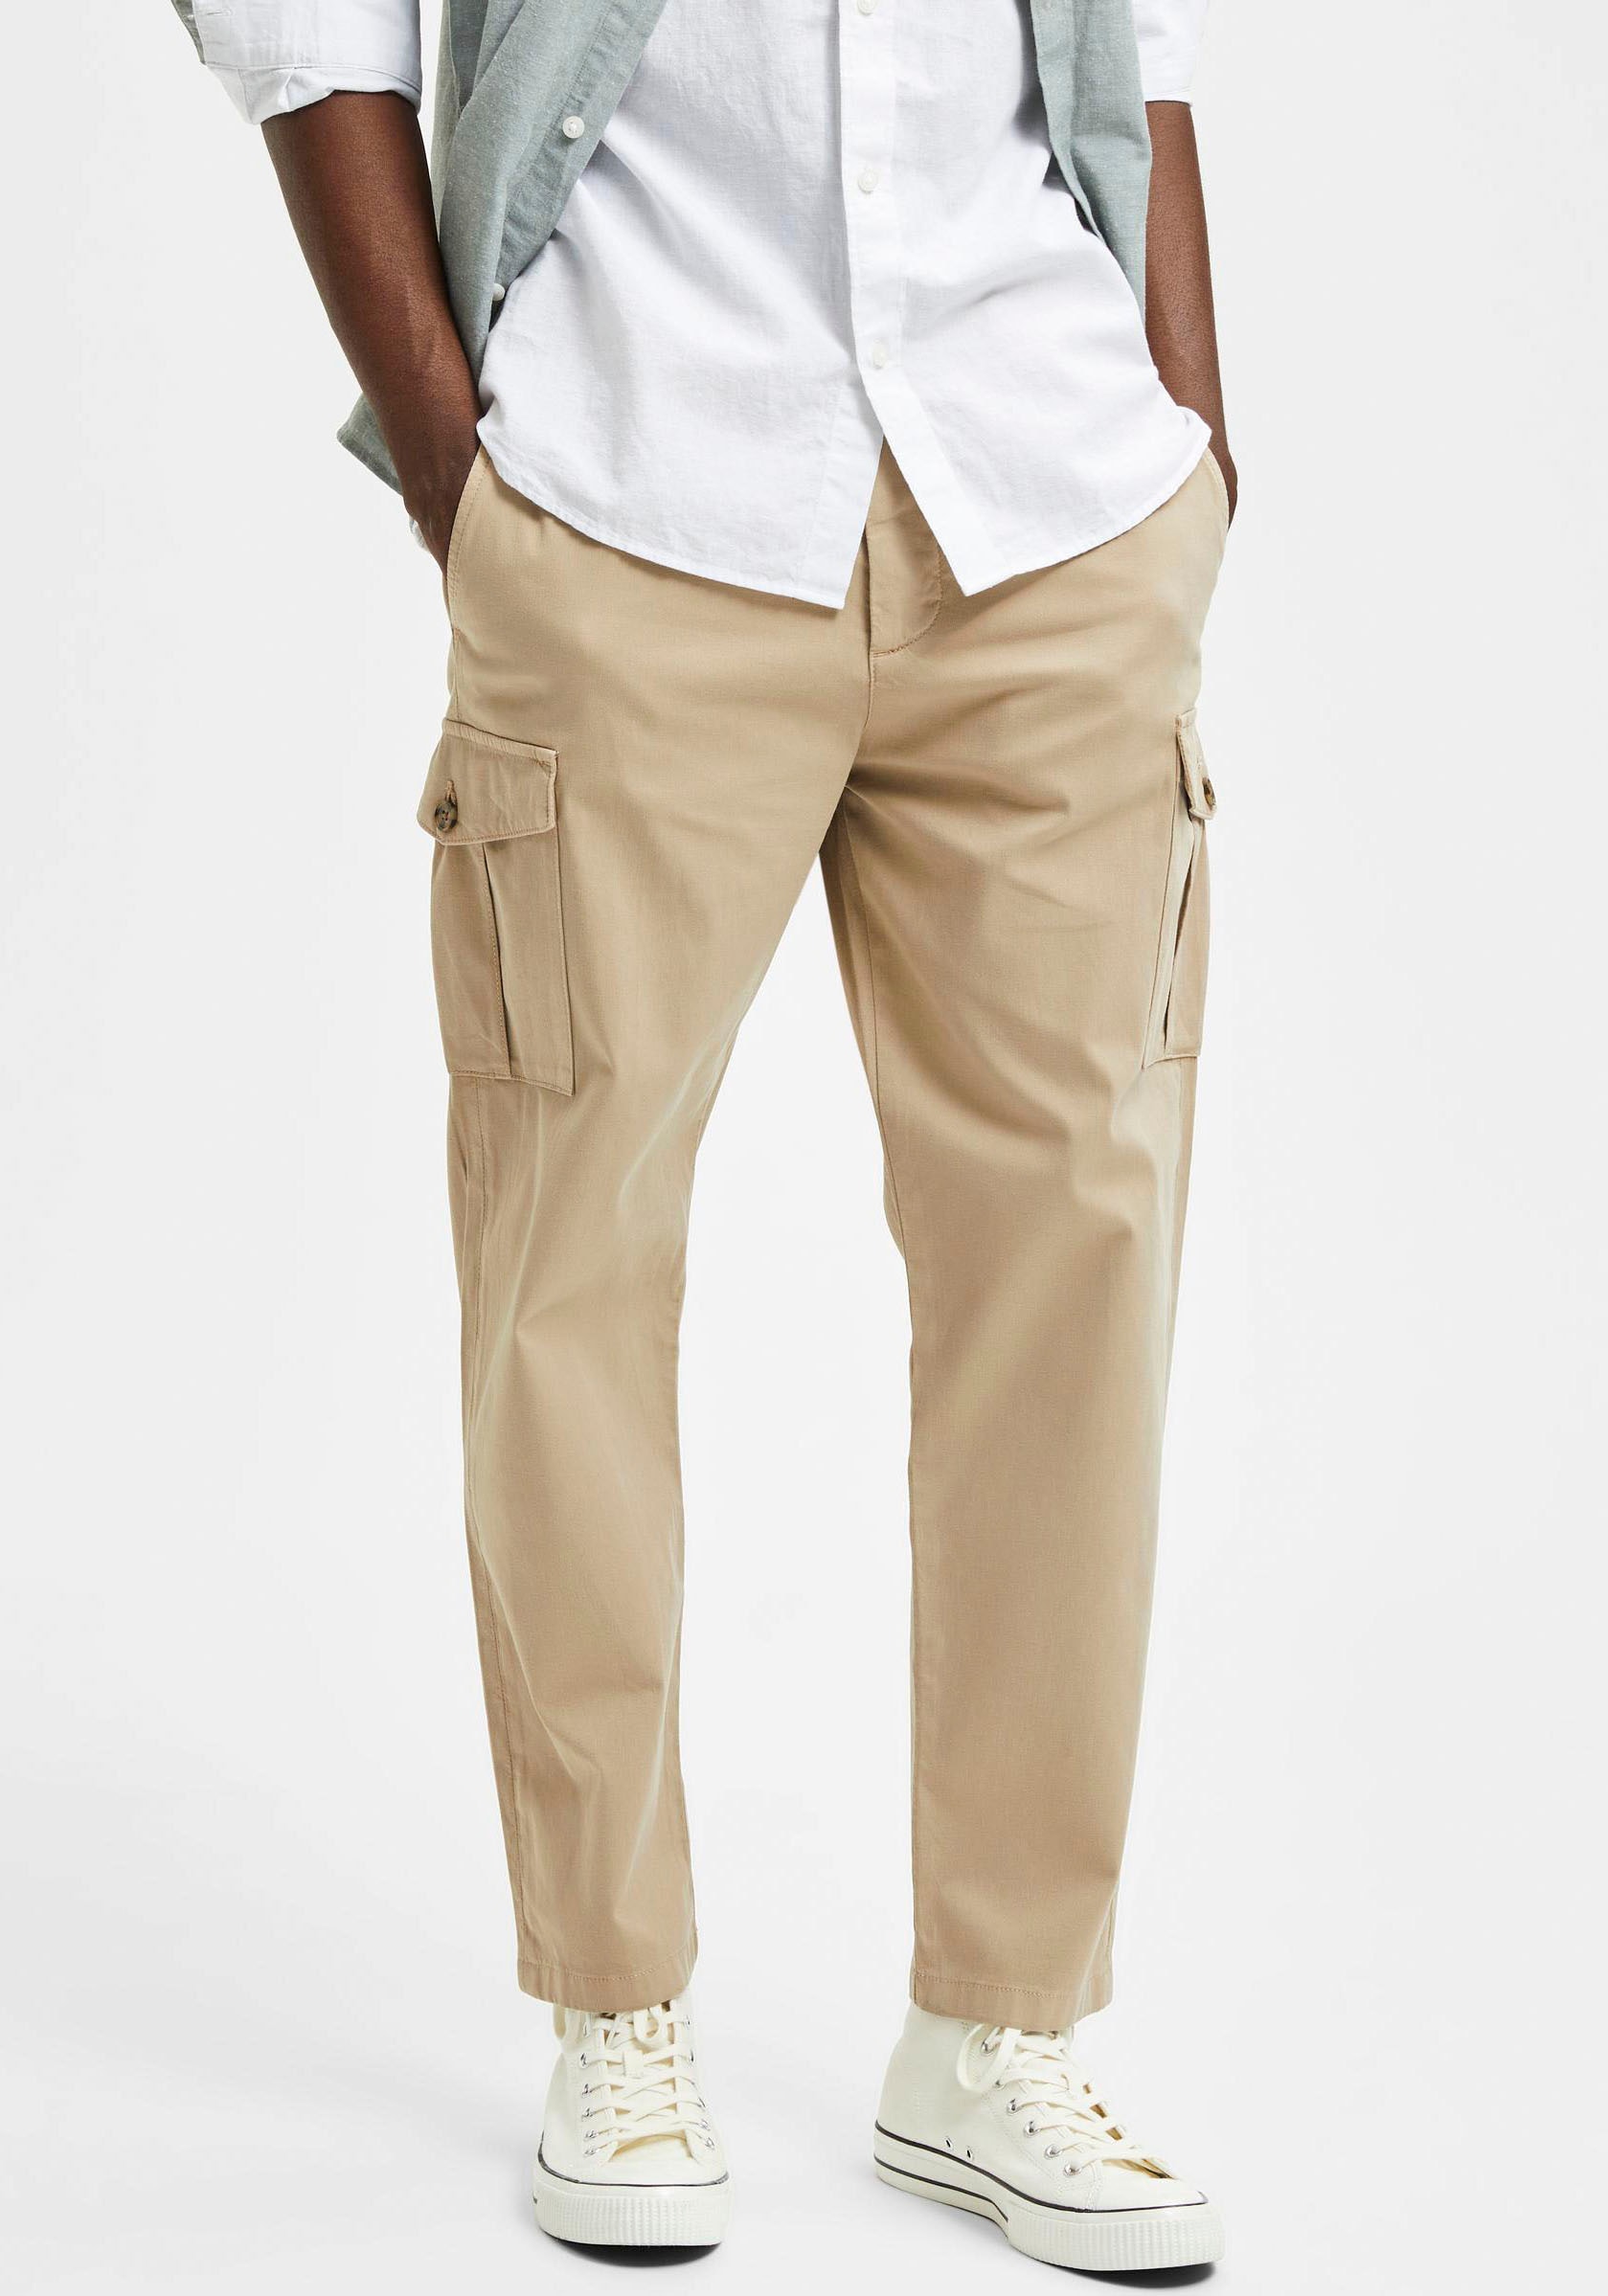 online SELECTED CARGO OTTO kaufen »WICK HOMME bei PANT« Cargohose